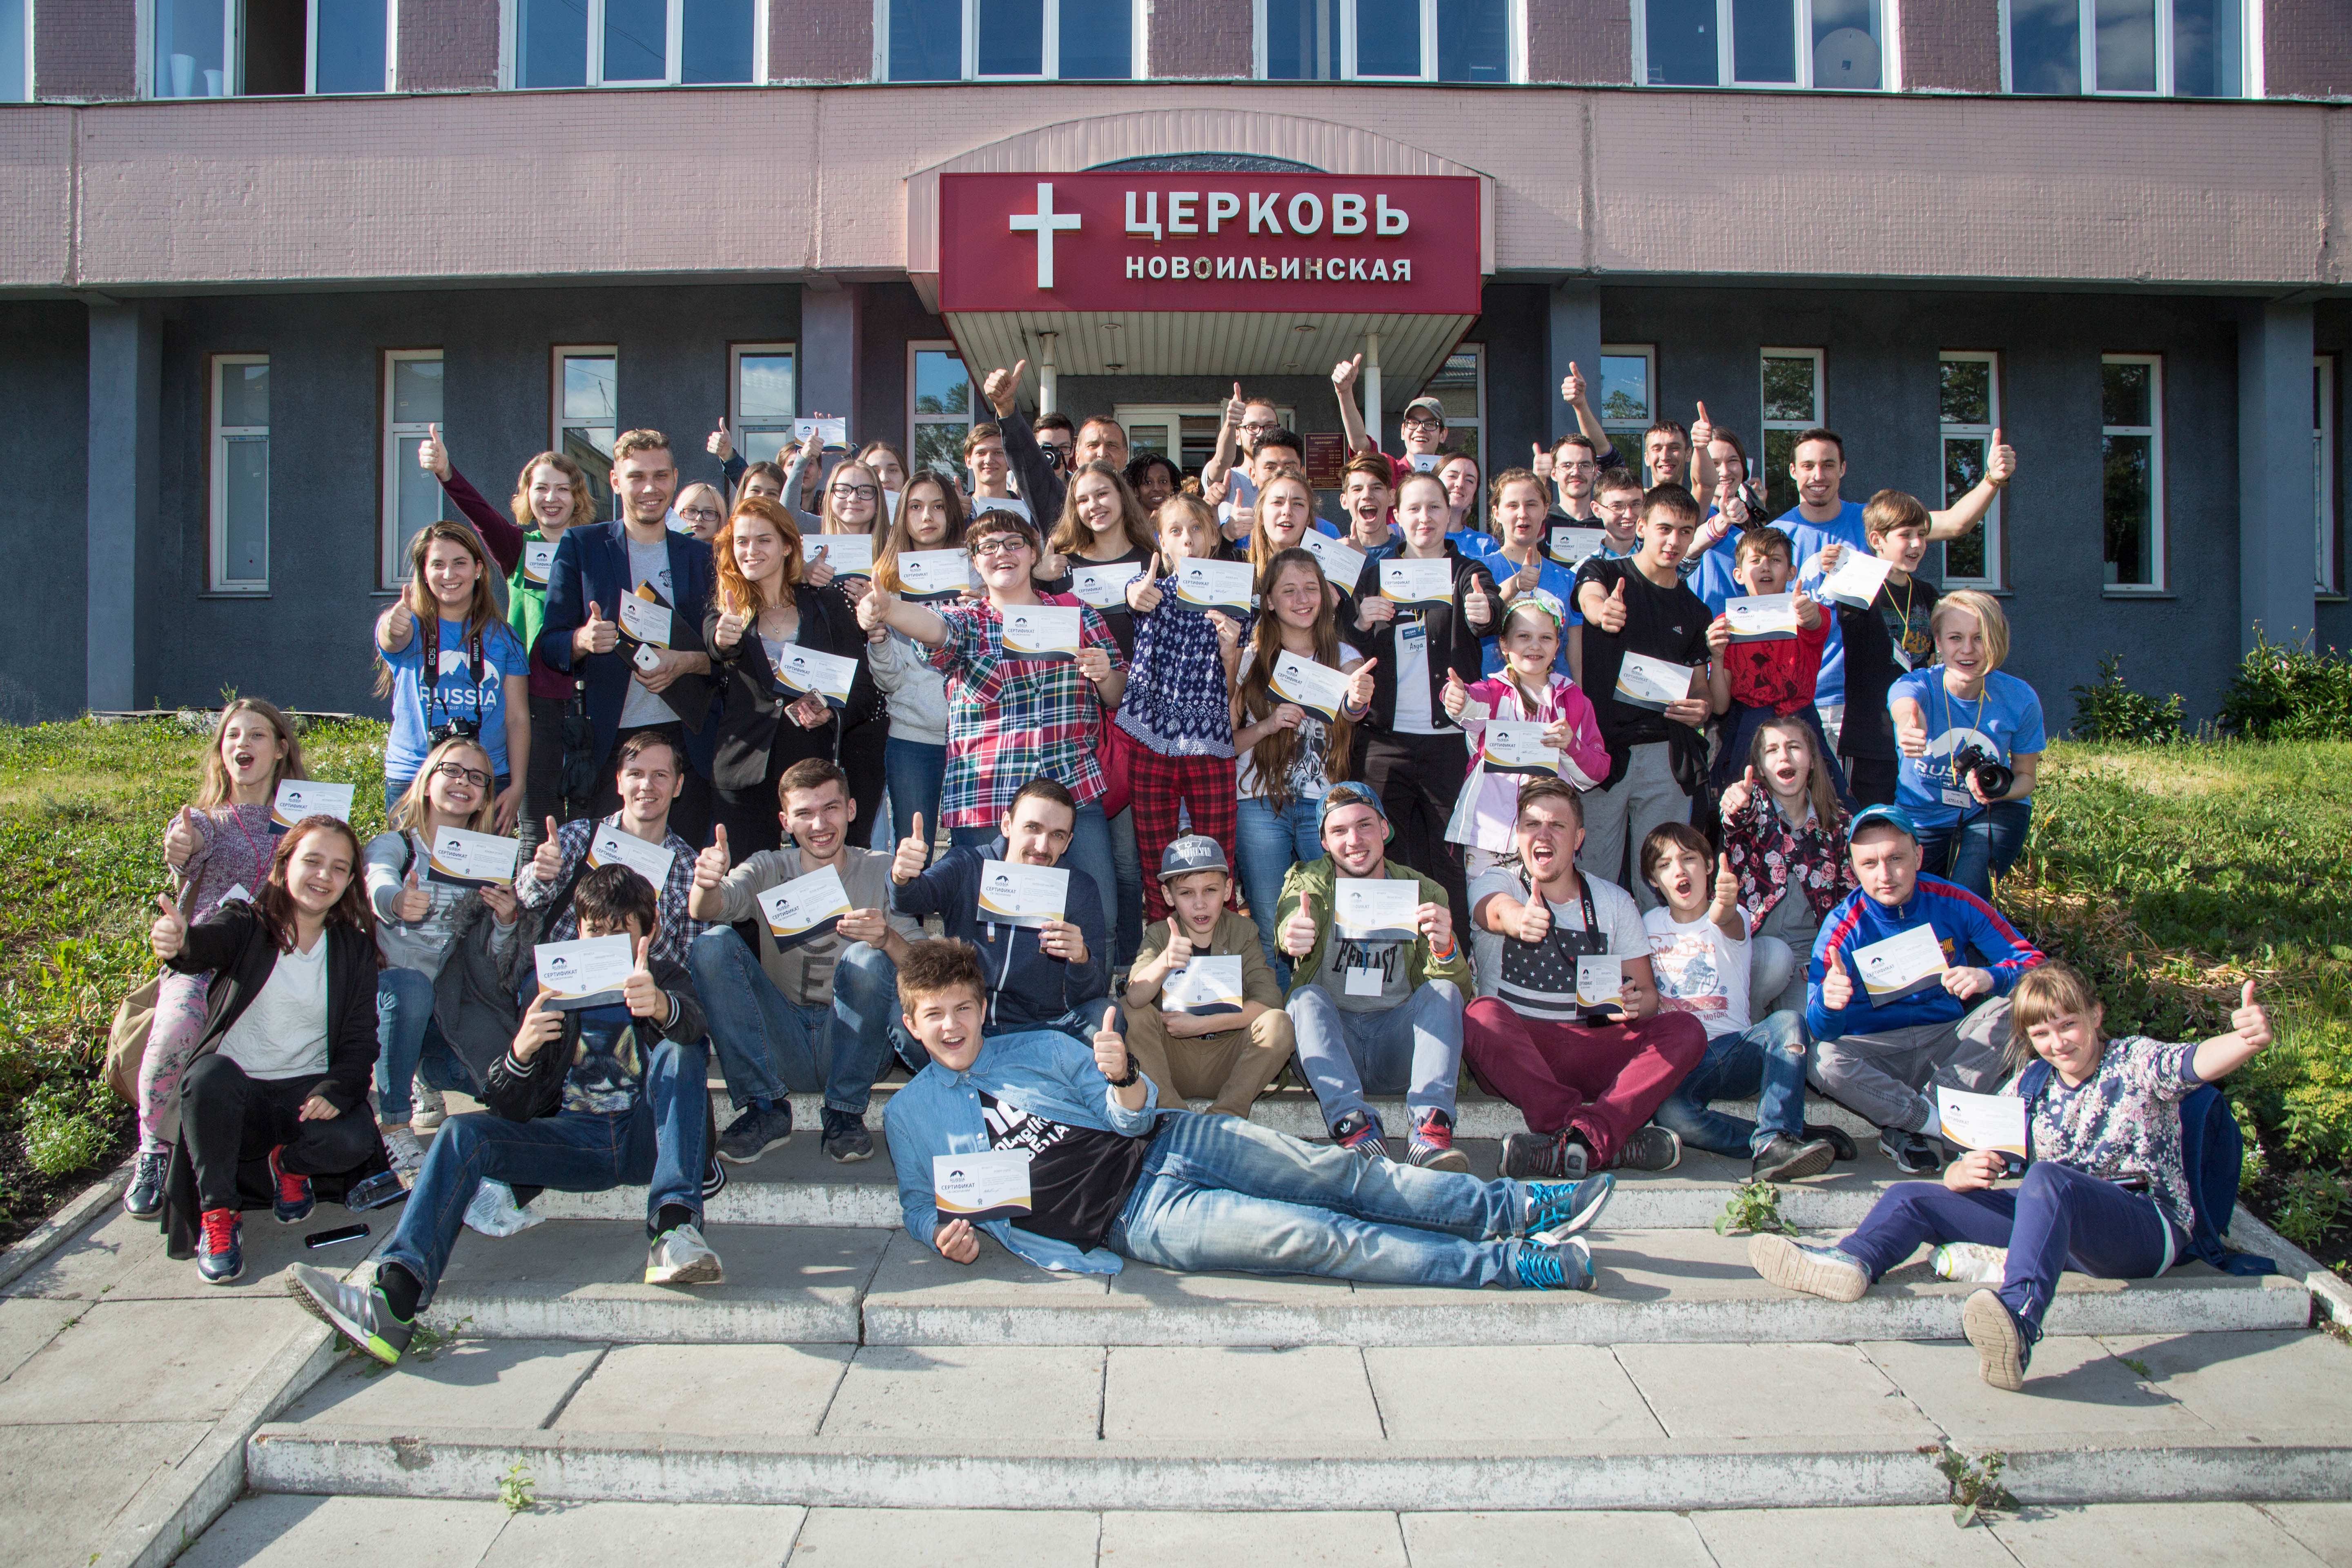 UVF Students in a group photo with Russian media students